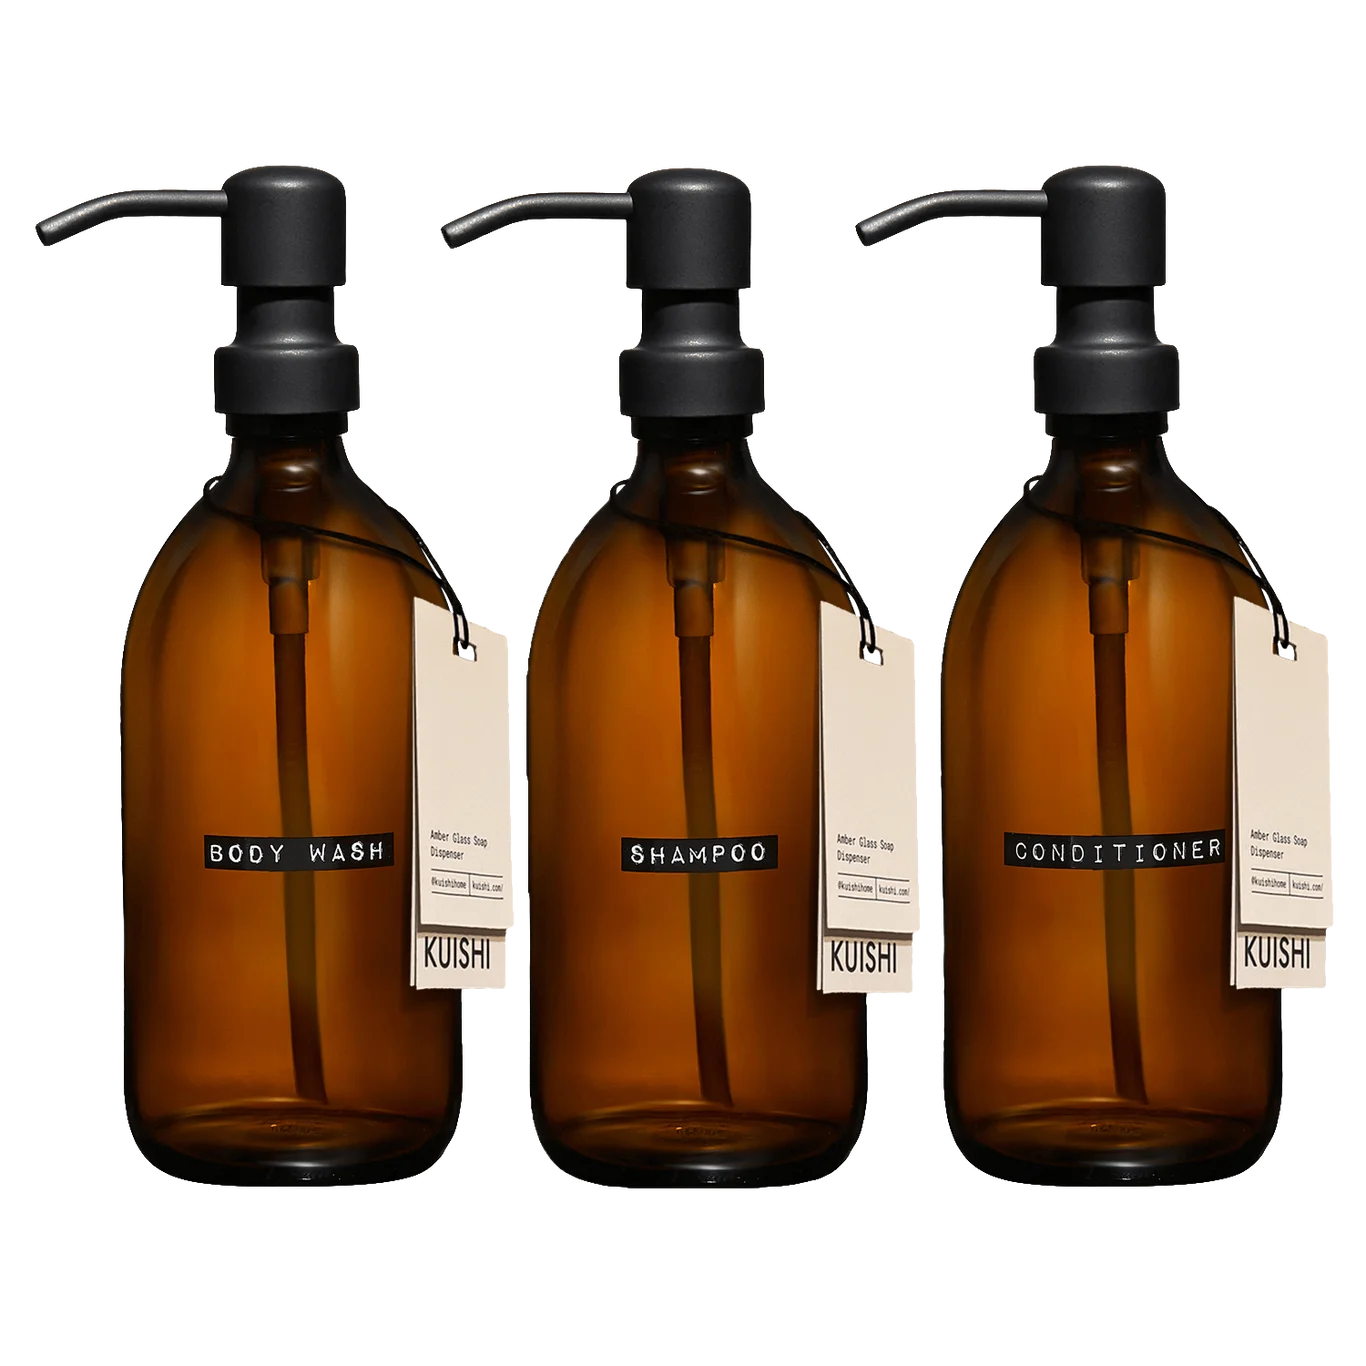 Shampoo Body wash and Conditioner Bottles